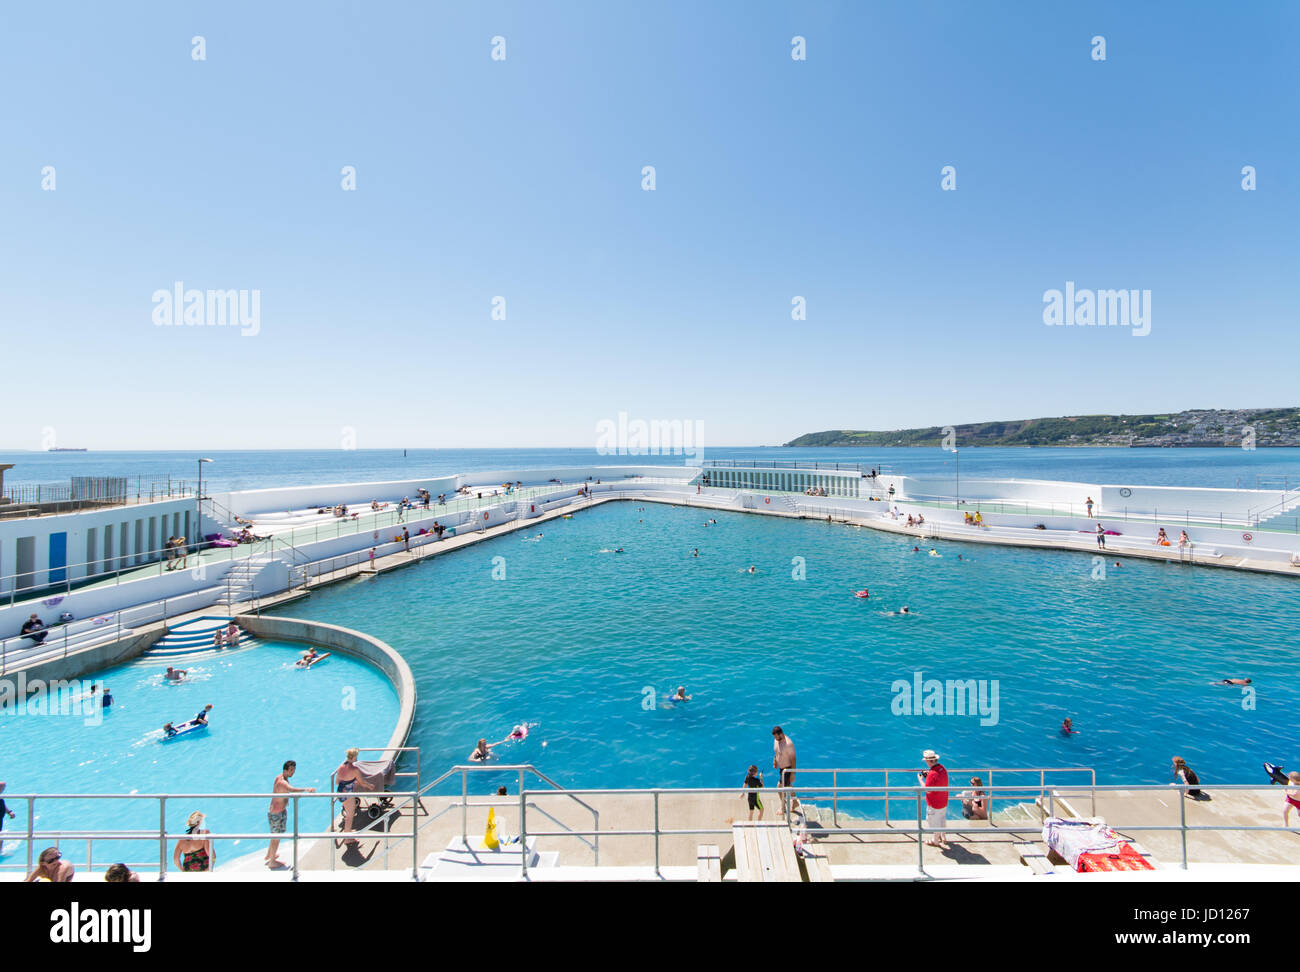 Penzance, Cornwall, UK. 18th June 2017. UK Weather. People colling off and sunbathing at the newly refurbished Jubilee Lido pool at Penzance, with views across Mounts bay towards Newlyn in the distance. Credit: cwallpix/Alamy Live News Stock Photo